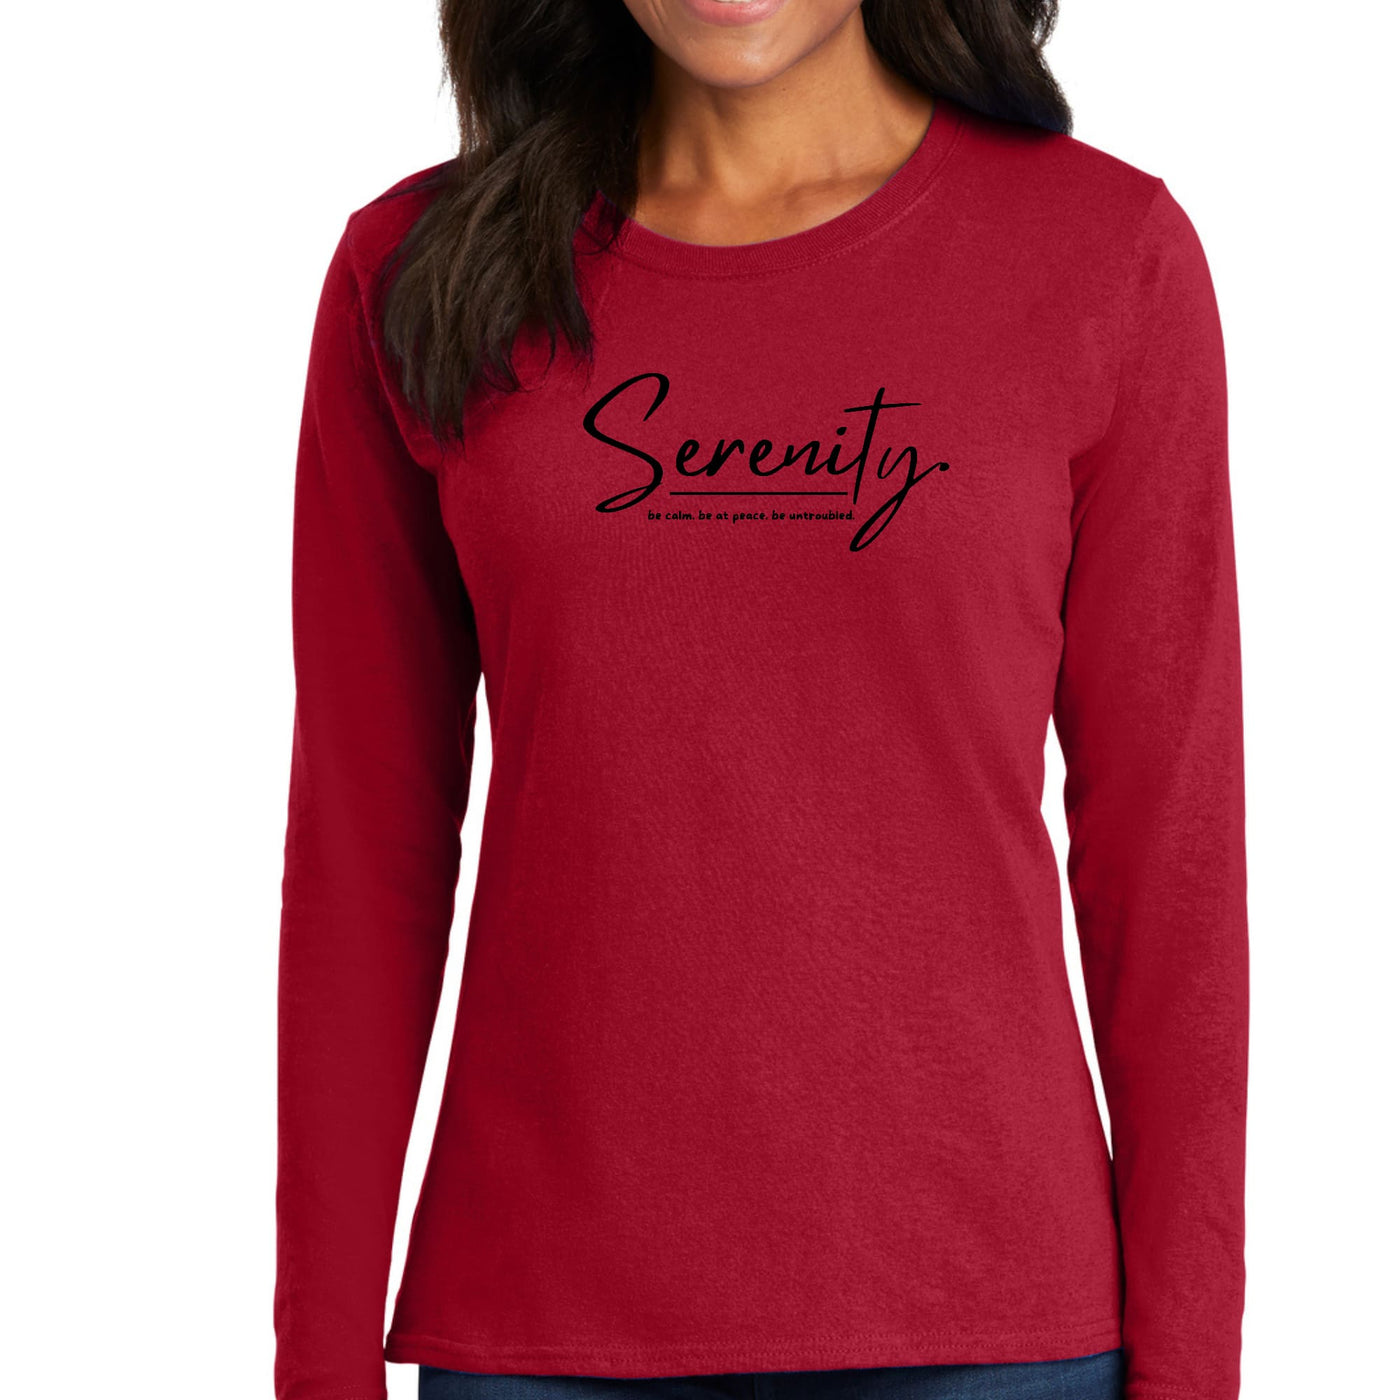 Womens Long Sleeve Graphic T-shirt - Serenity - Be Calm Be At Peace - Womens